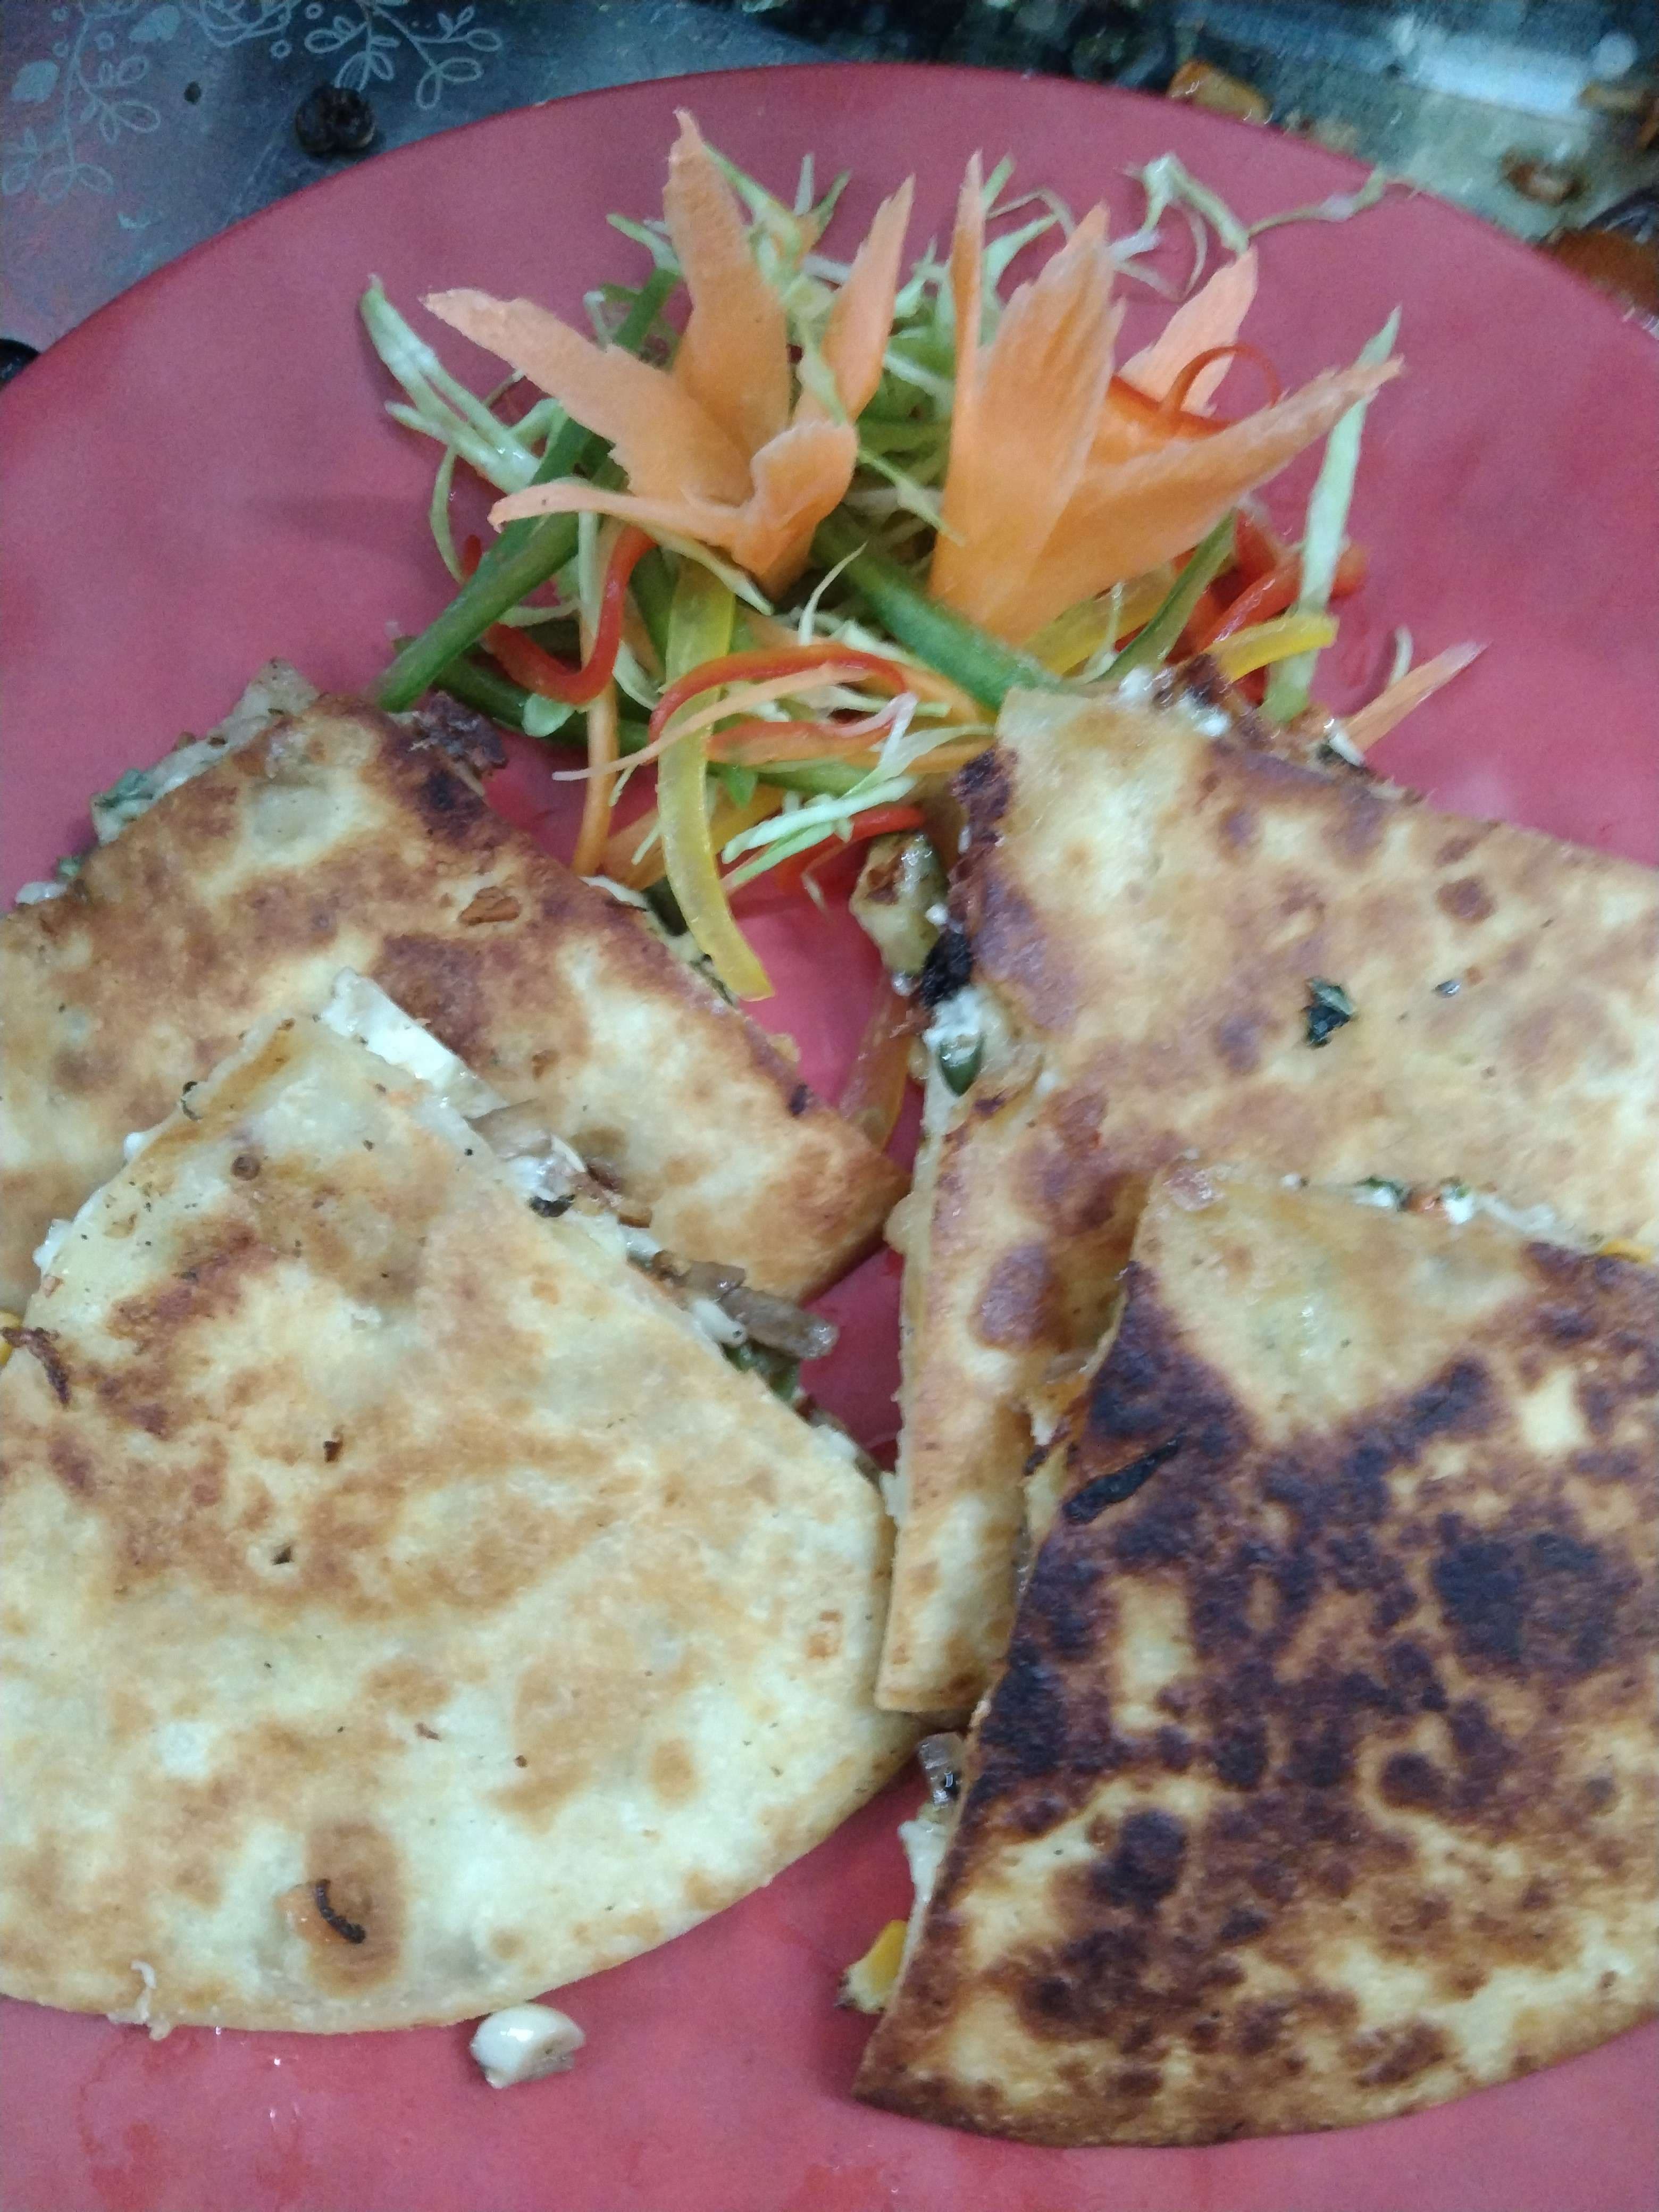 Tasty Veg Quesadillas cooked by COOX chefs cooks during occasions parties events at home